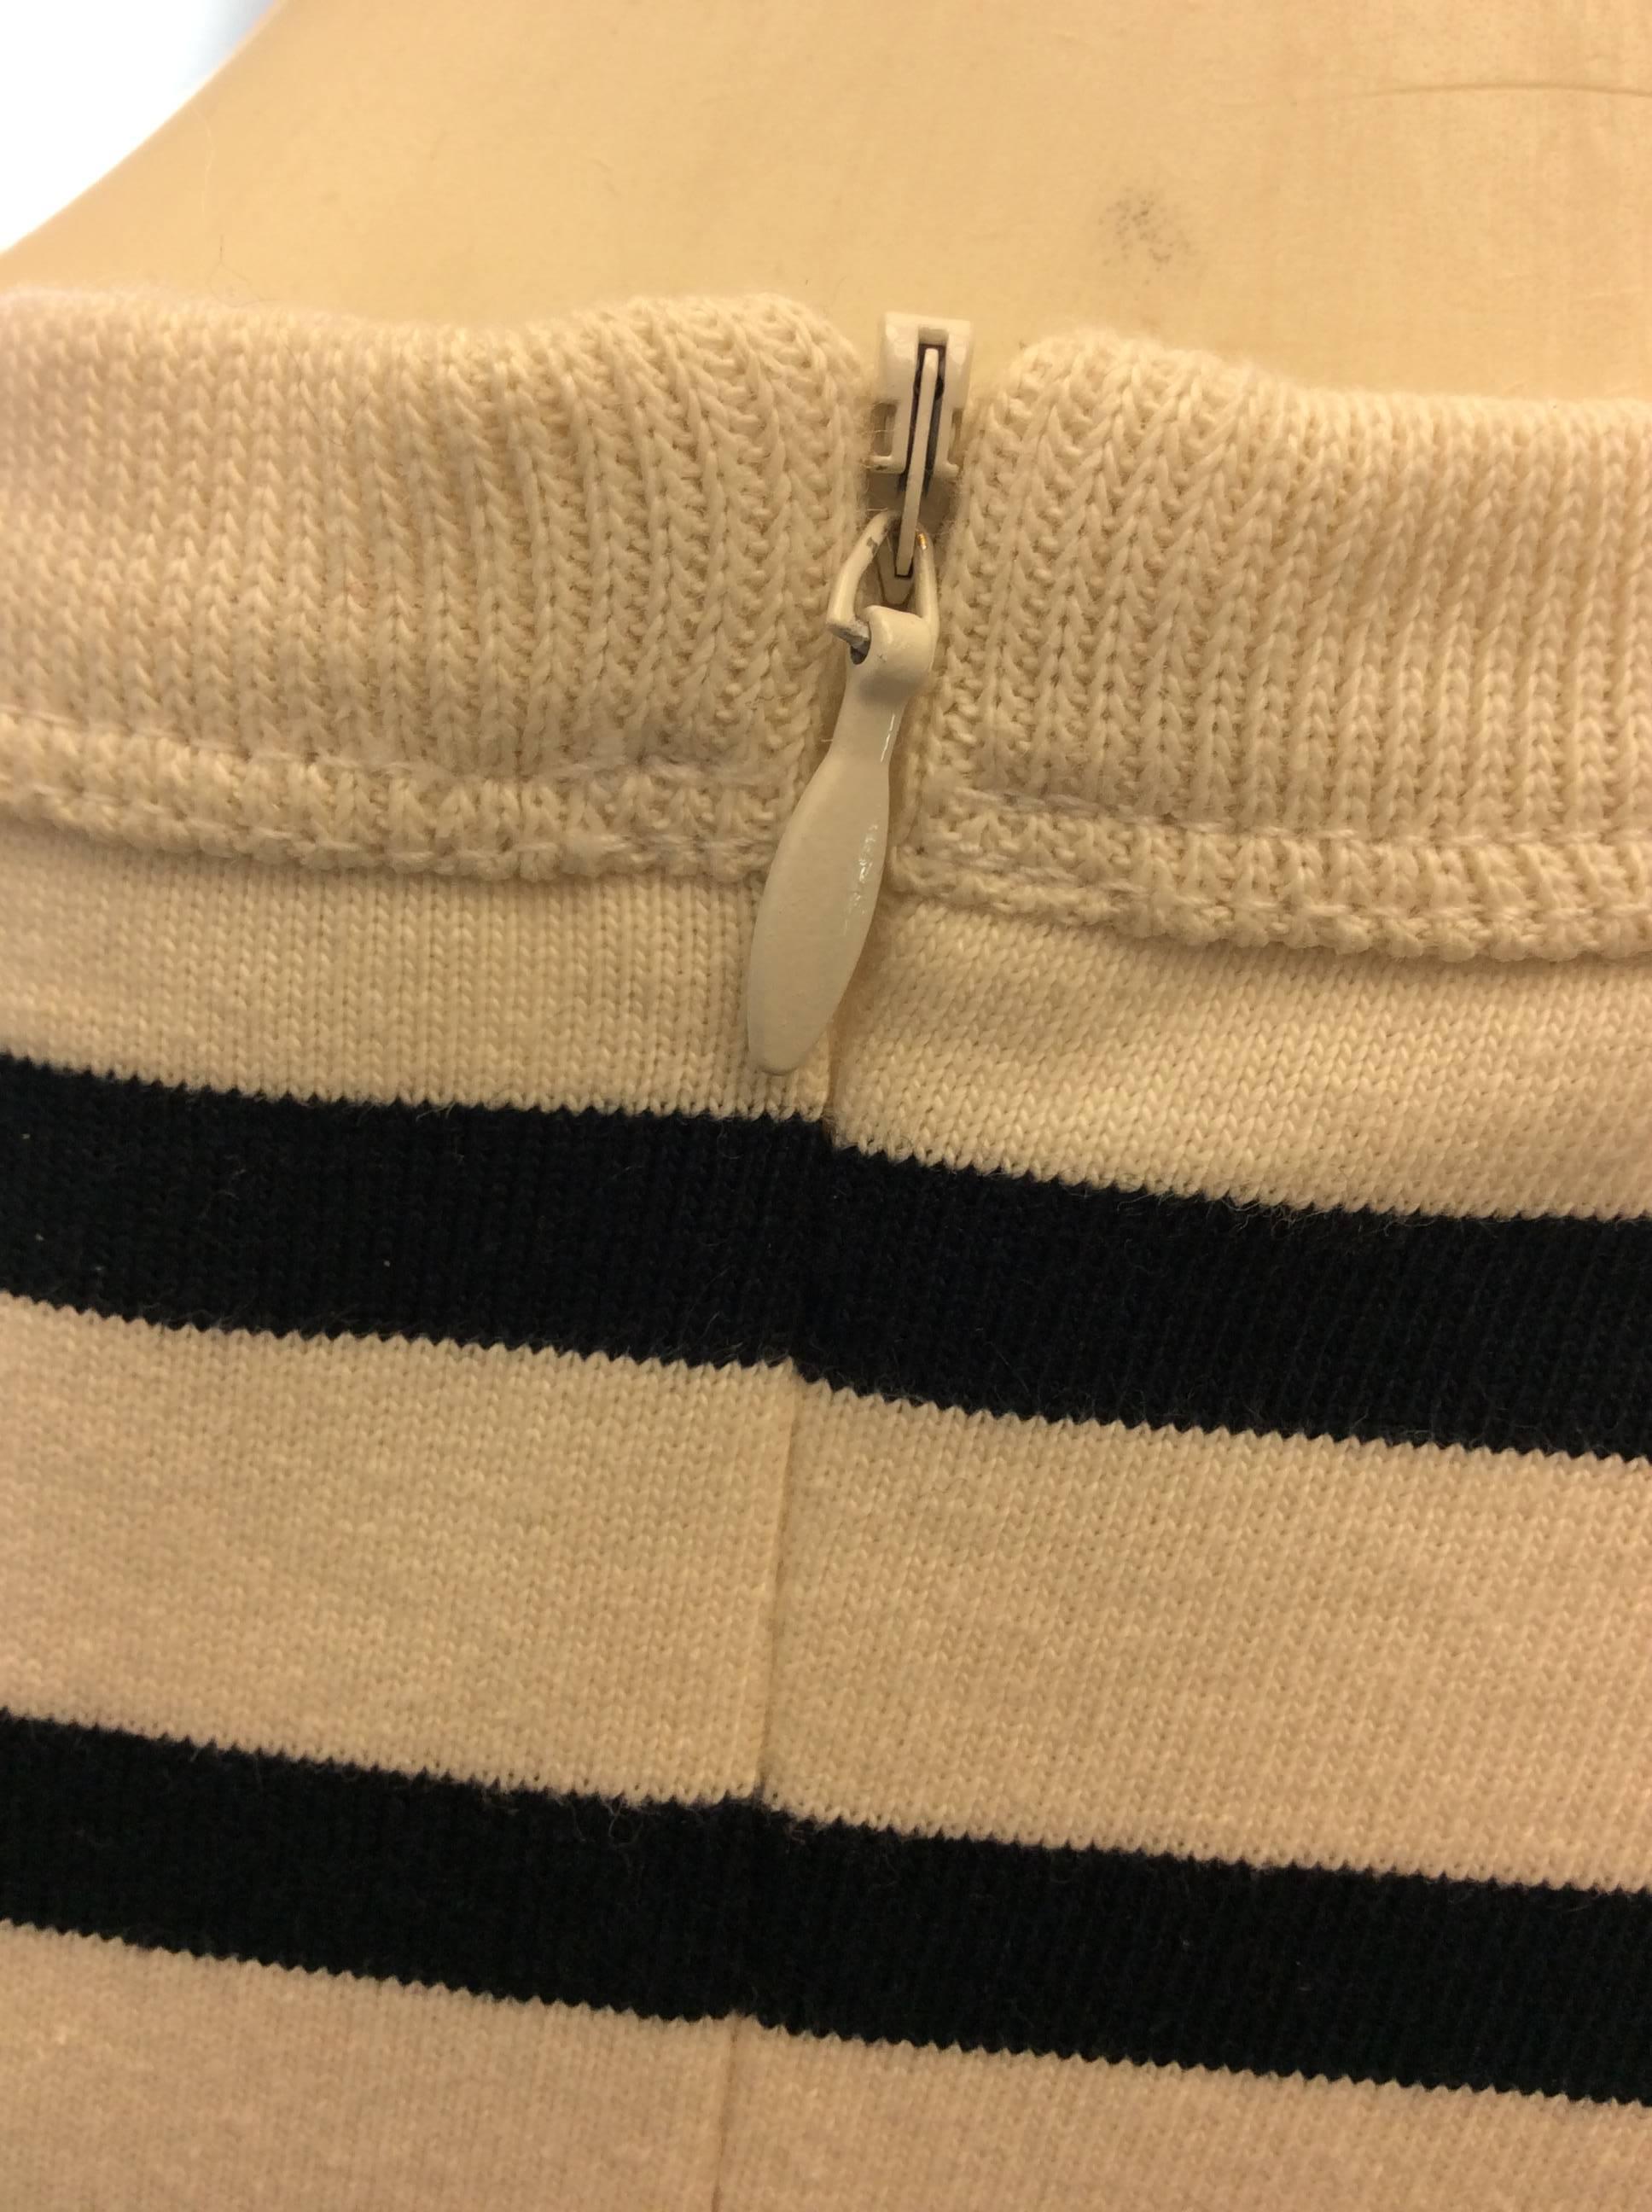 Alexander Wang Navy Blue and White Stripe Dress NWT For Sale 1